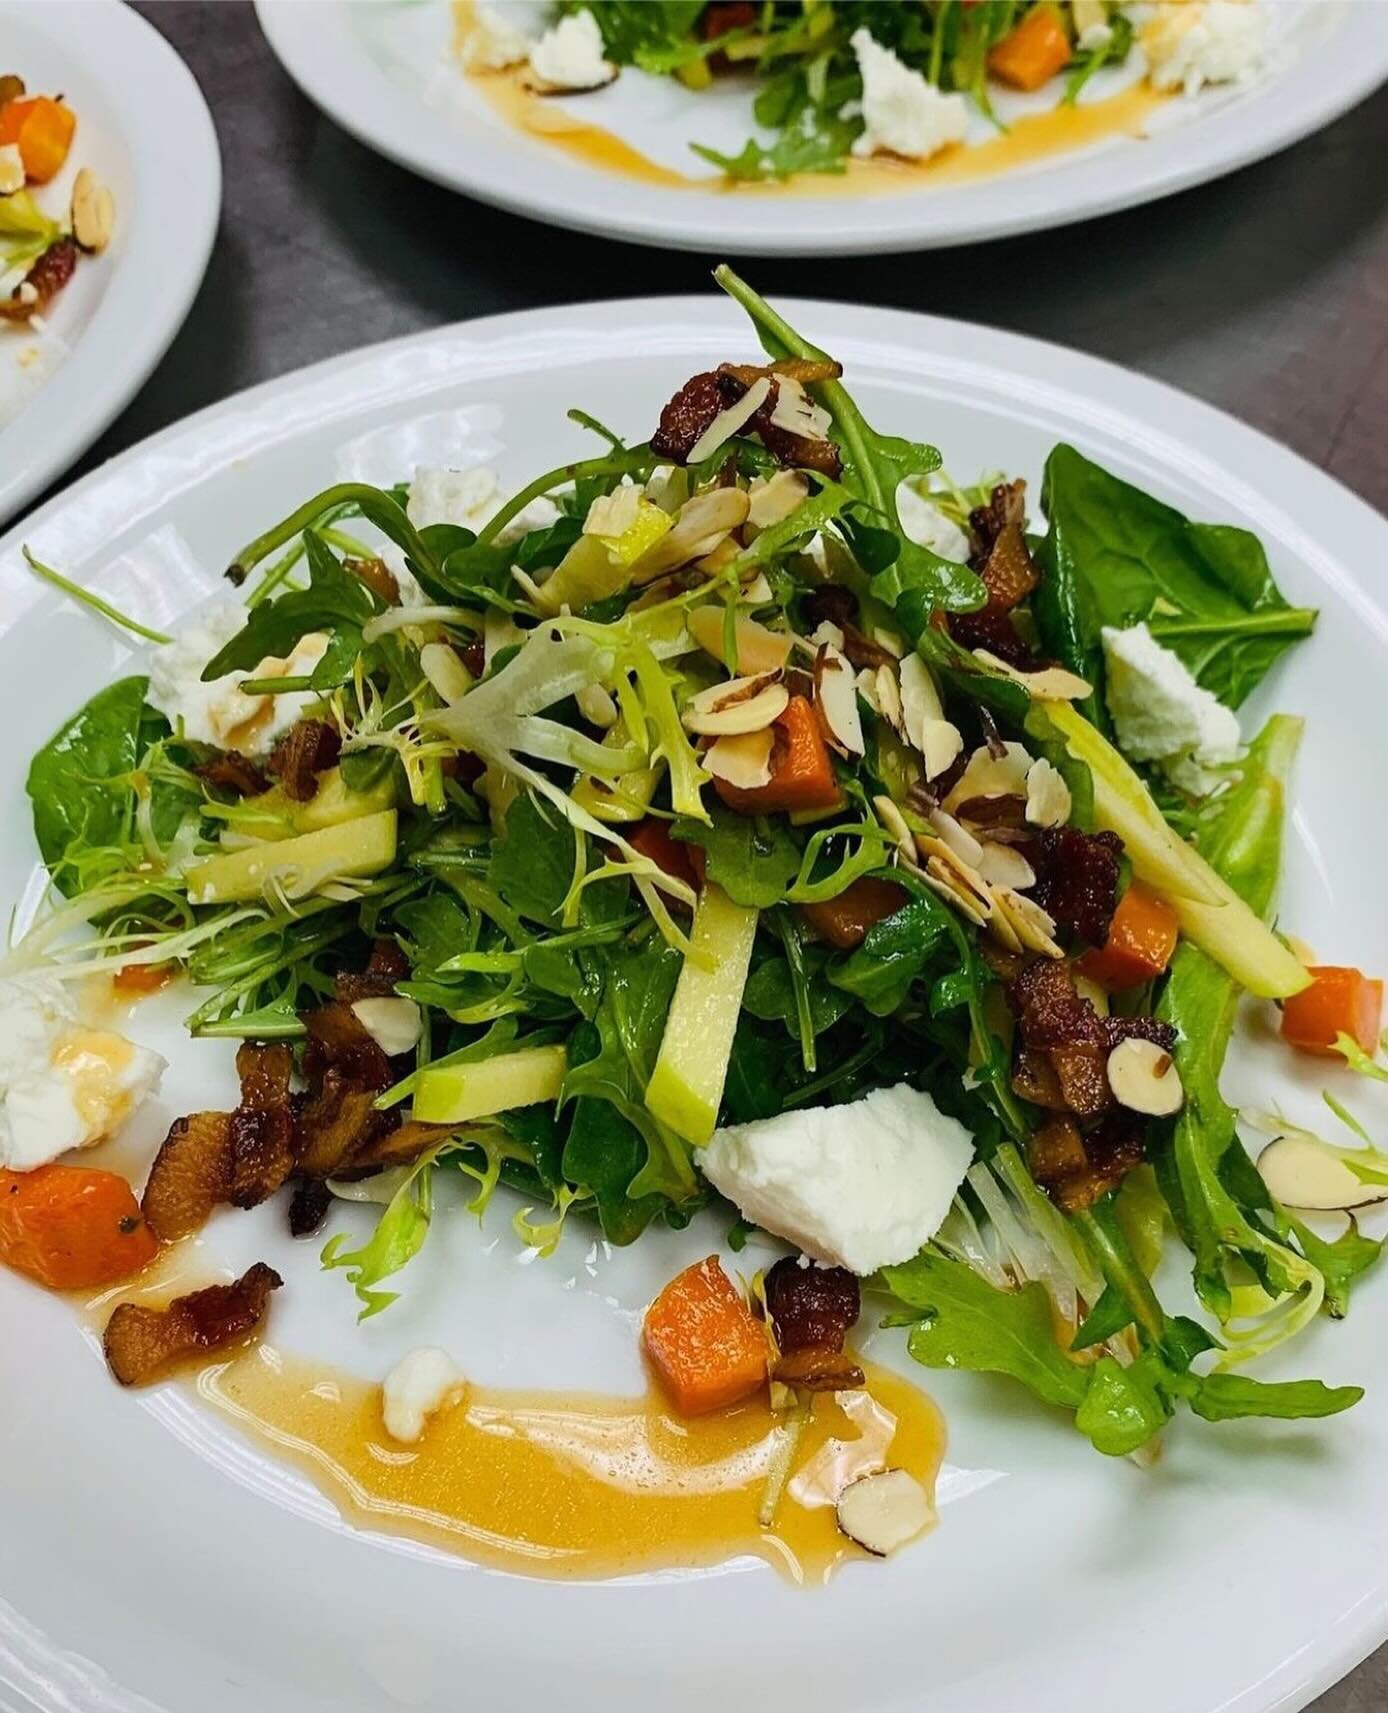 Repost from @culinaryconcepts_ab
&bull;
Our talented Chef Ingrid led our #FarmToFork class, celebrating the flavors of our region. 🍽️✨⁠
⁠
The seasonal salad was a star of the show, featuring locally sourced butternut squash and apples that came stra